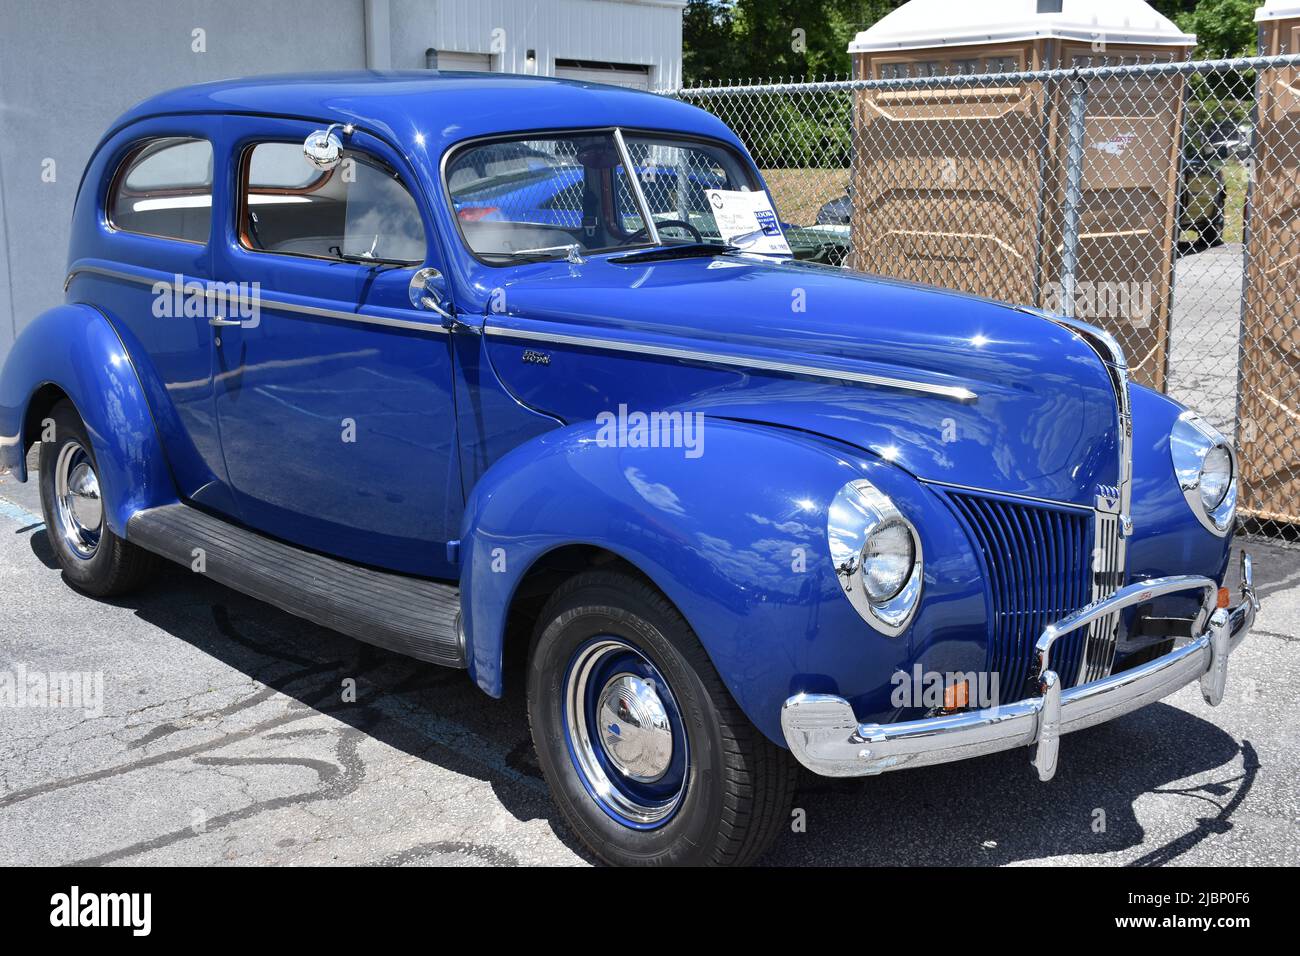 A 1940 Ford Tudor Coupe on display at a car show. Stock Photo